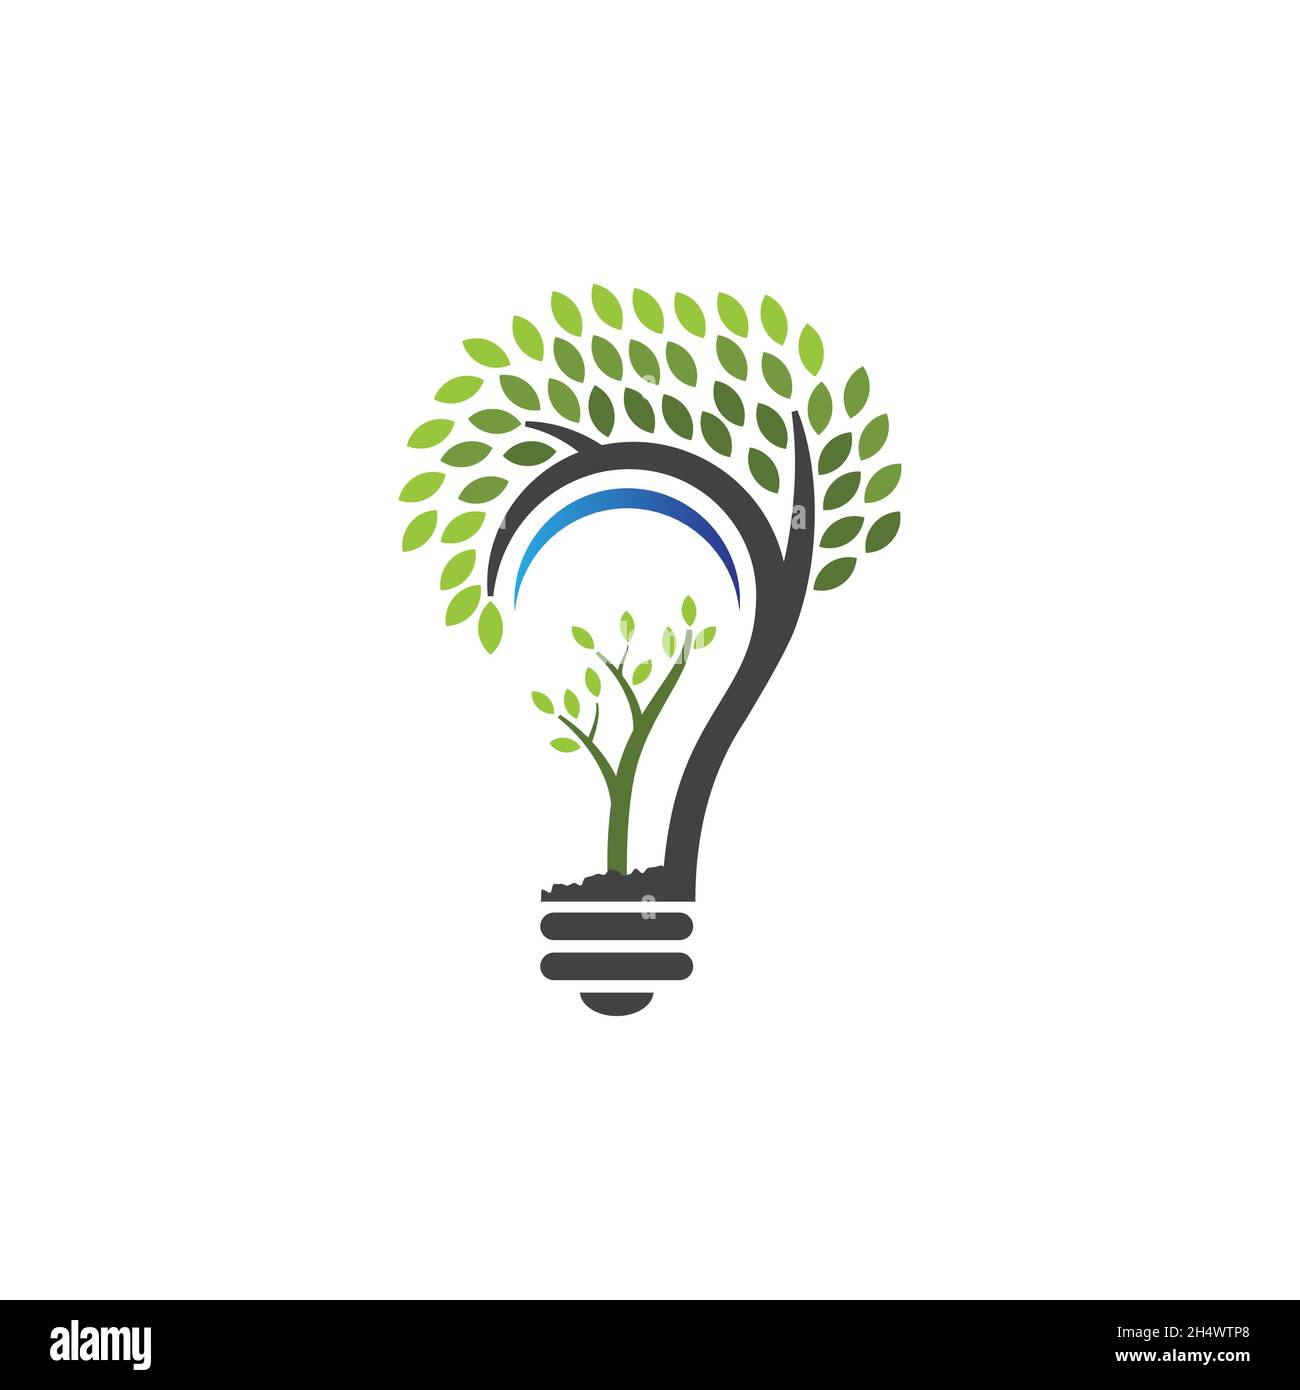 vector, illustrations. combination logo from bulb and natural fresh tree logo. energy power saving for good life. Stock Vector